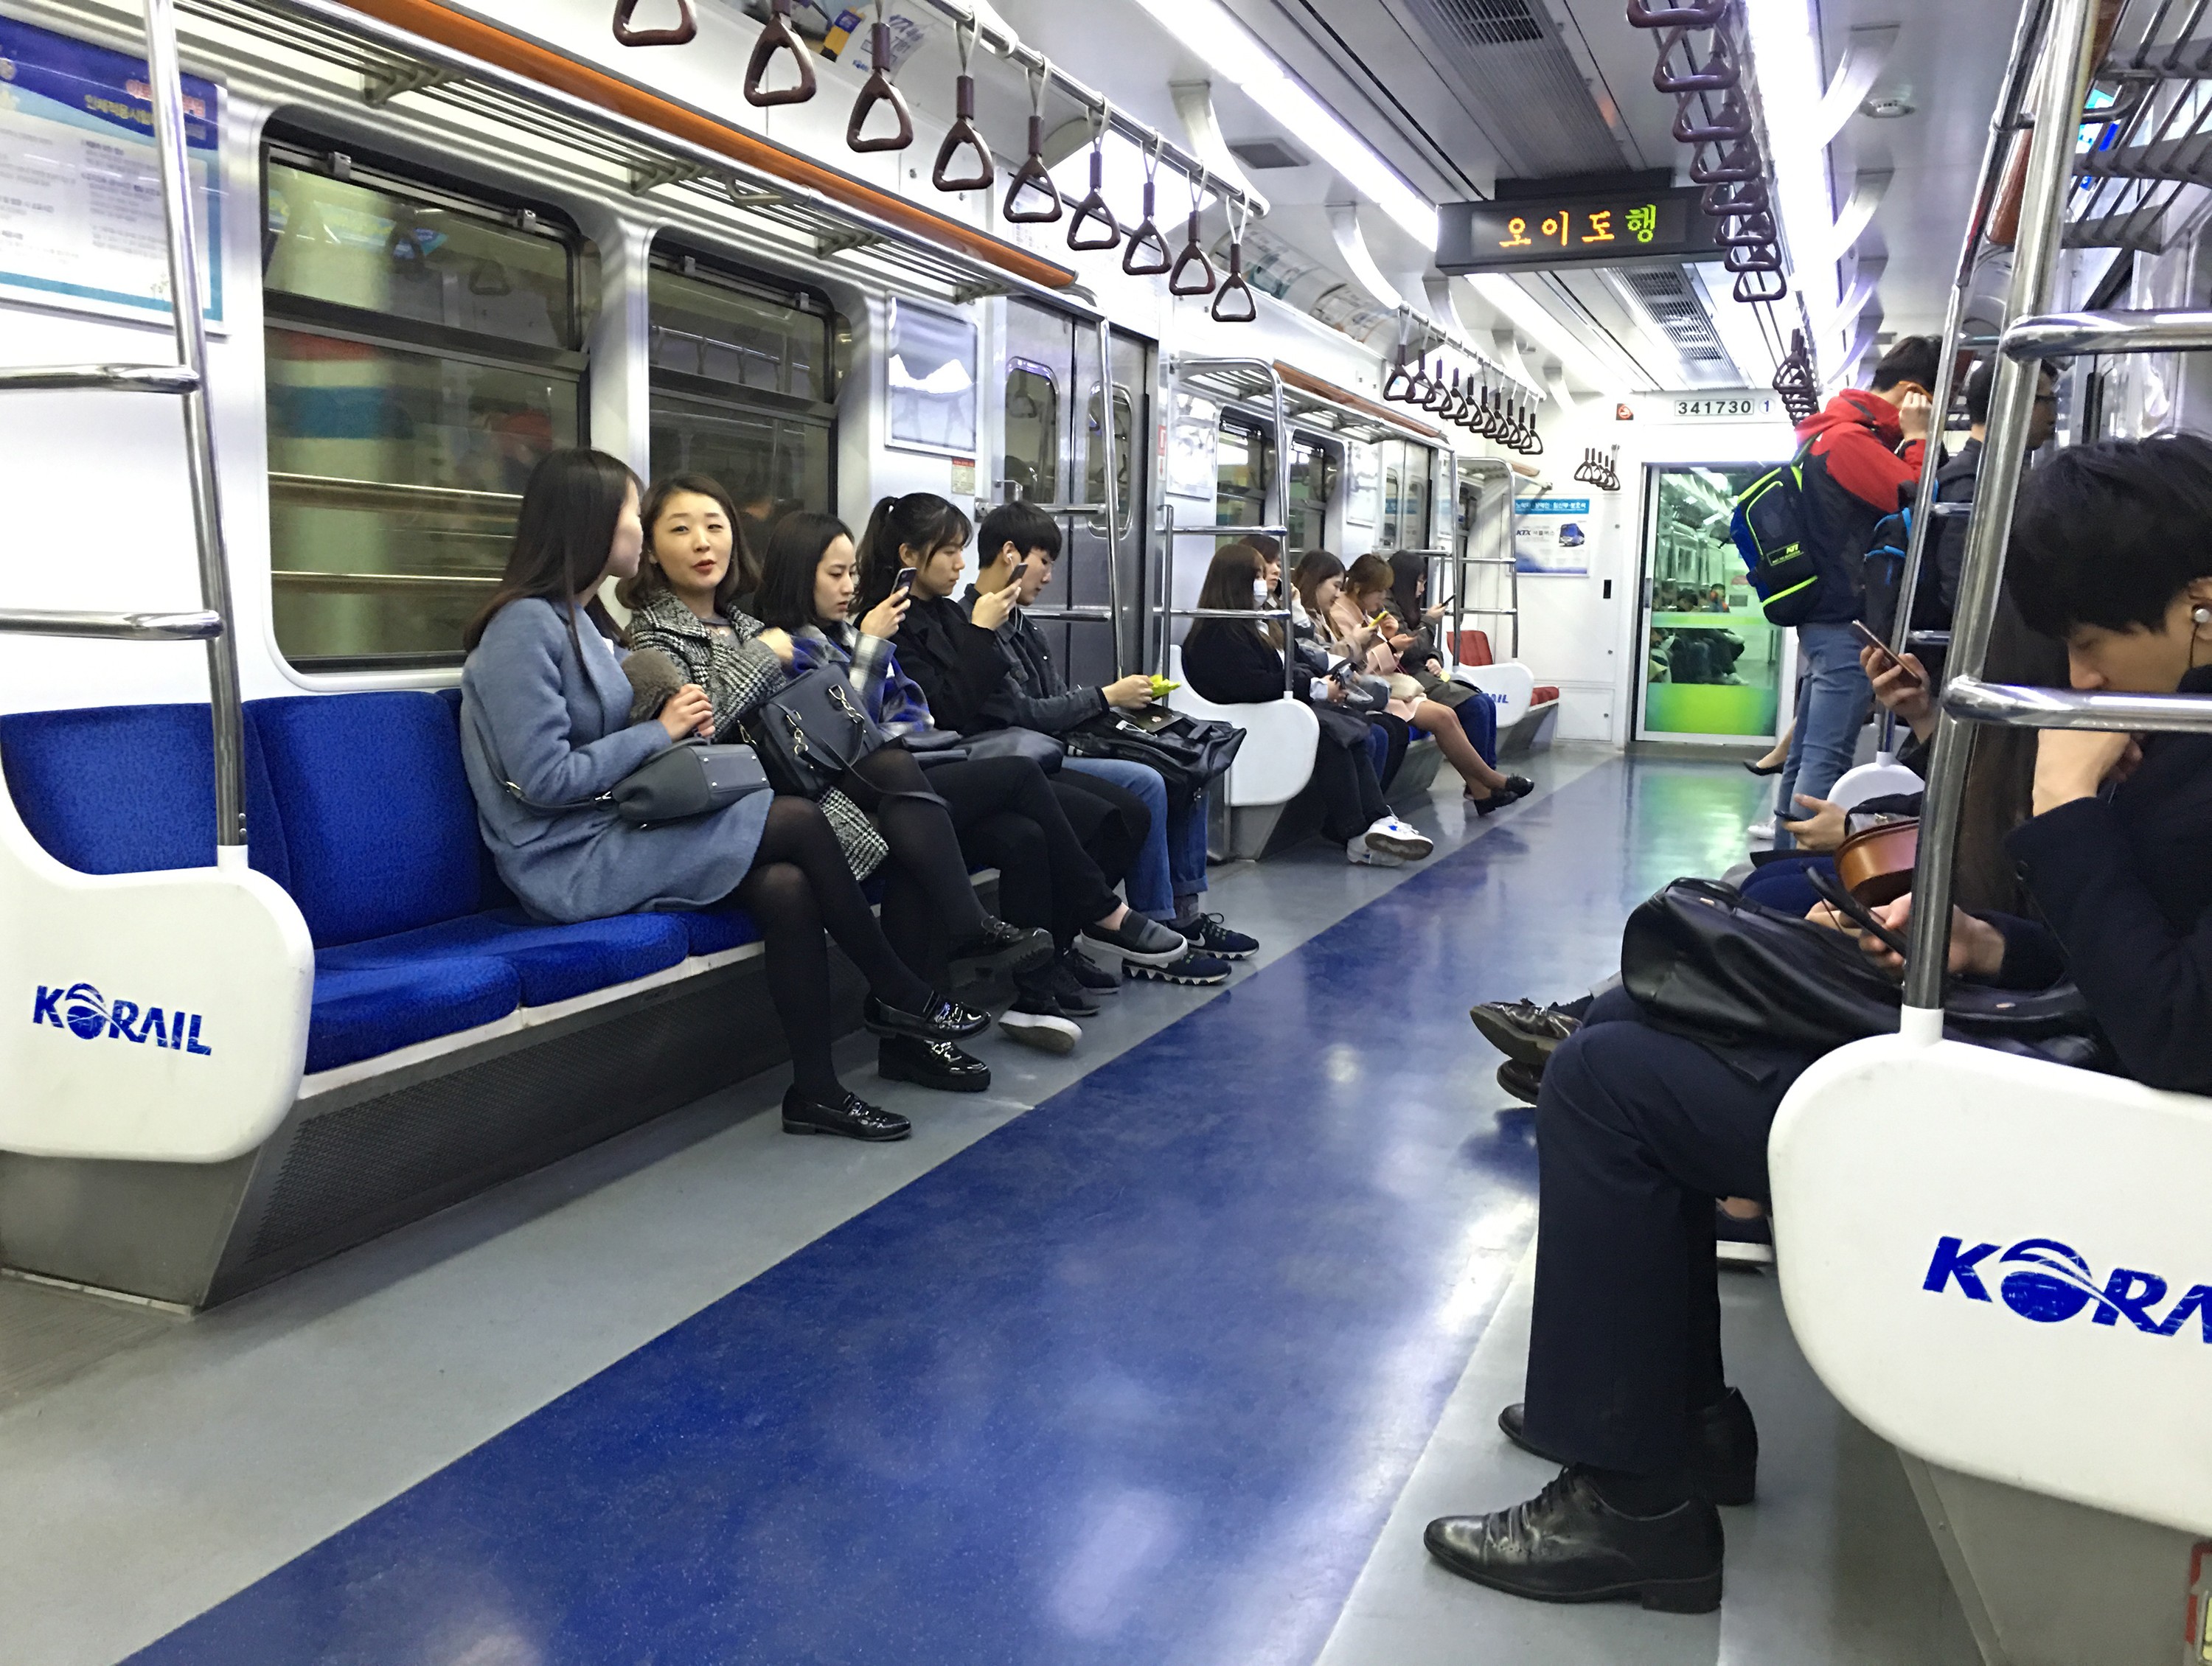 The Seoul Metro system in South Korea has been ranked the best in the world by Essential Living. Photo: Shutterstock